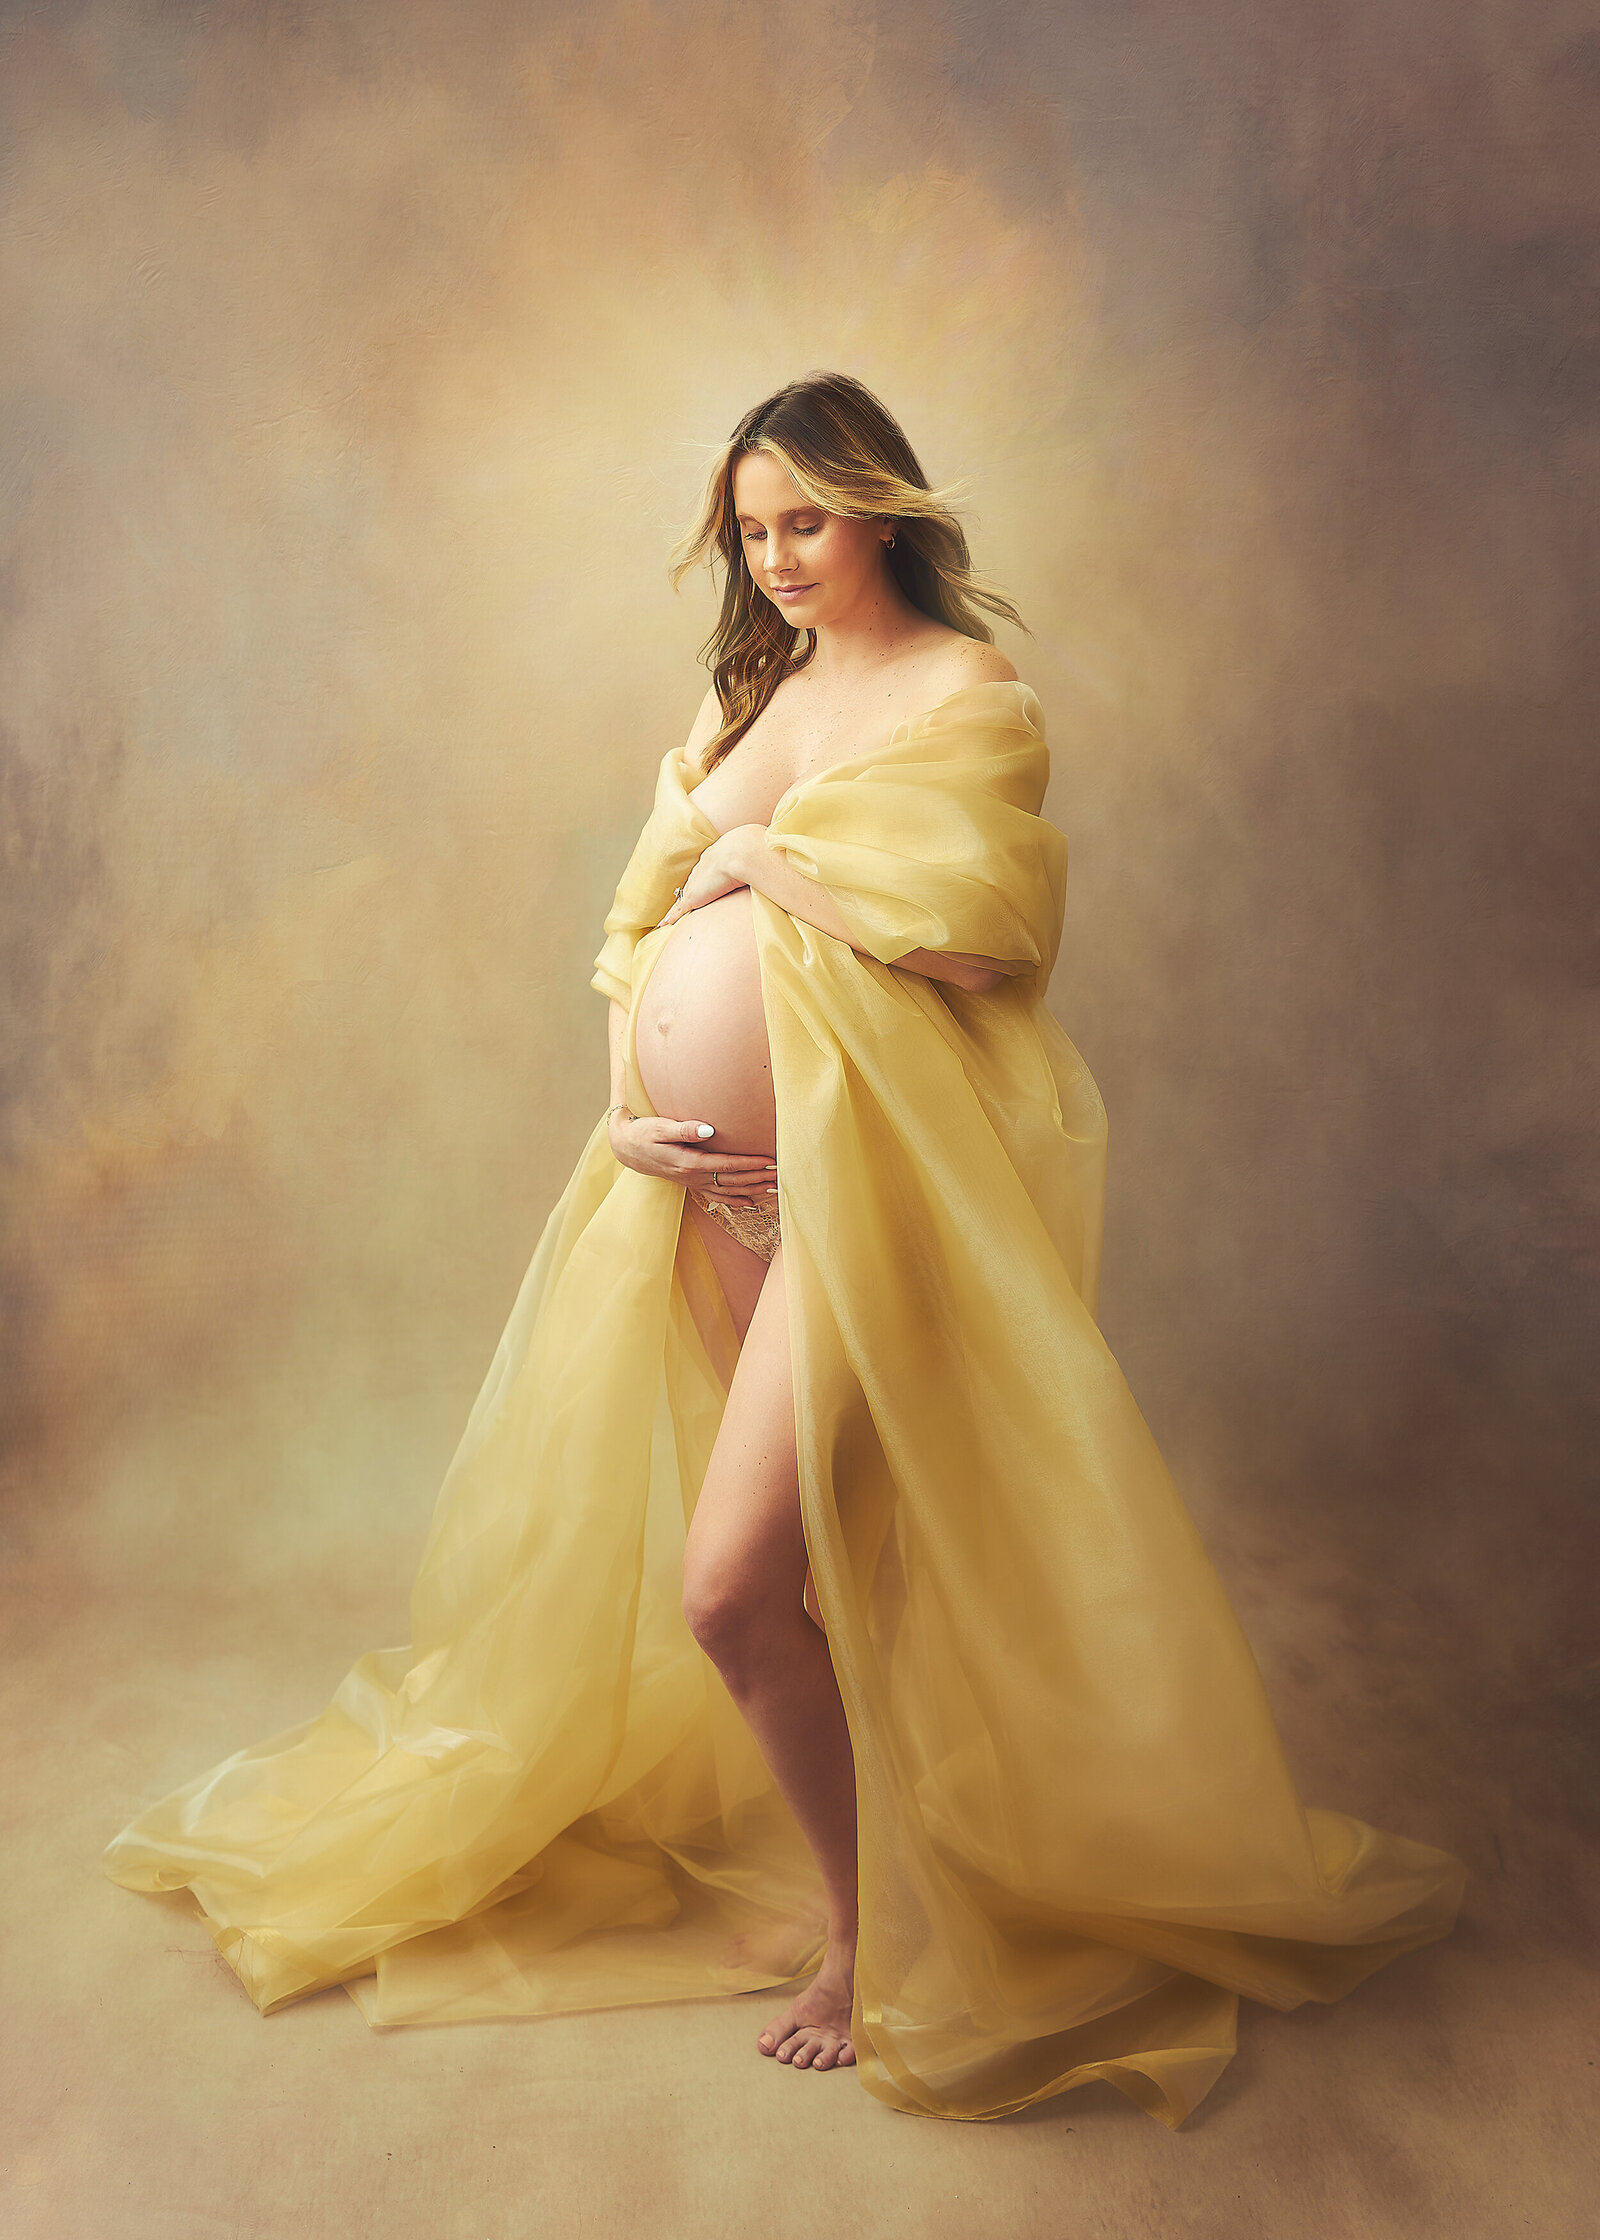 atlanta-best-award-winning-maternity-pregnancy-portrait-studio-fine-art-glamour-nude-gold-angelic-couture-photography-photographer-twin-rivers